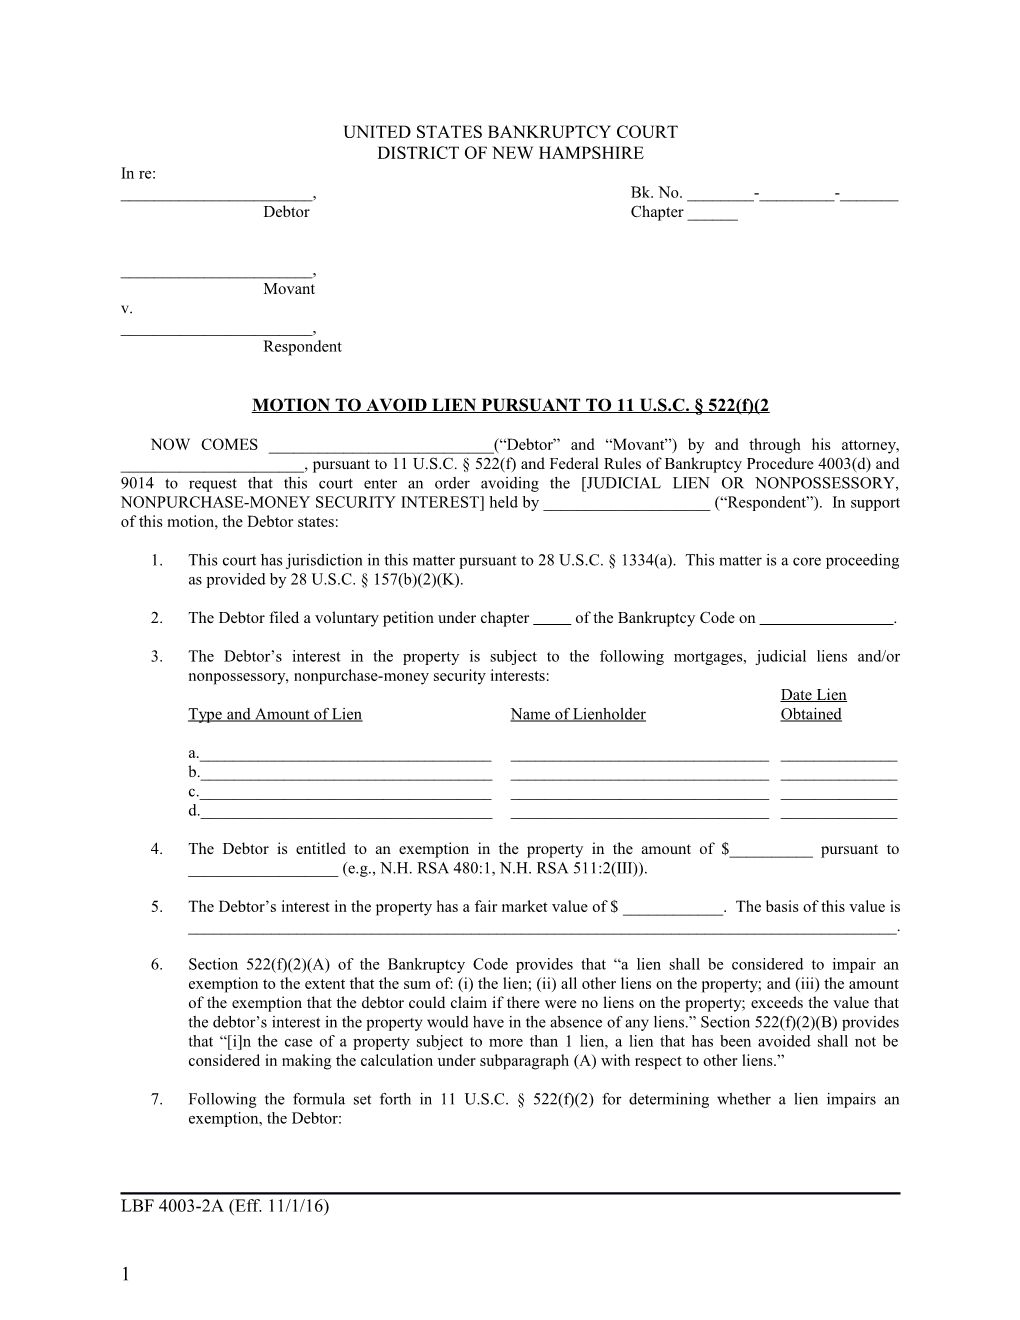 MOTIONTO AVOID LIEN PURSUANT to 11 U.S.C. 522(F)(2